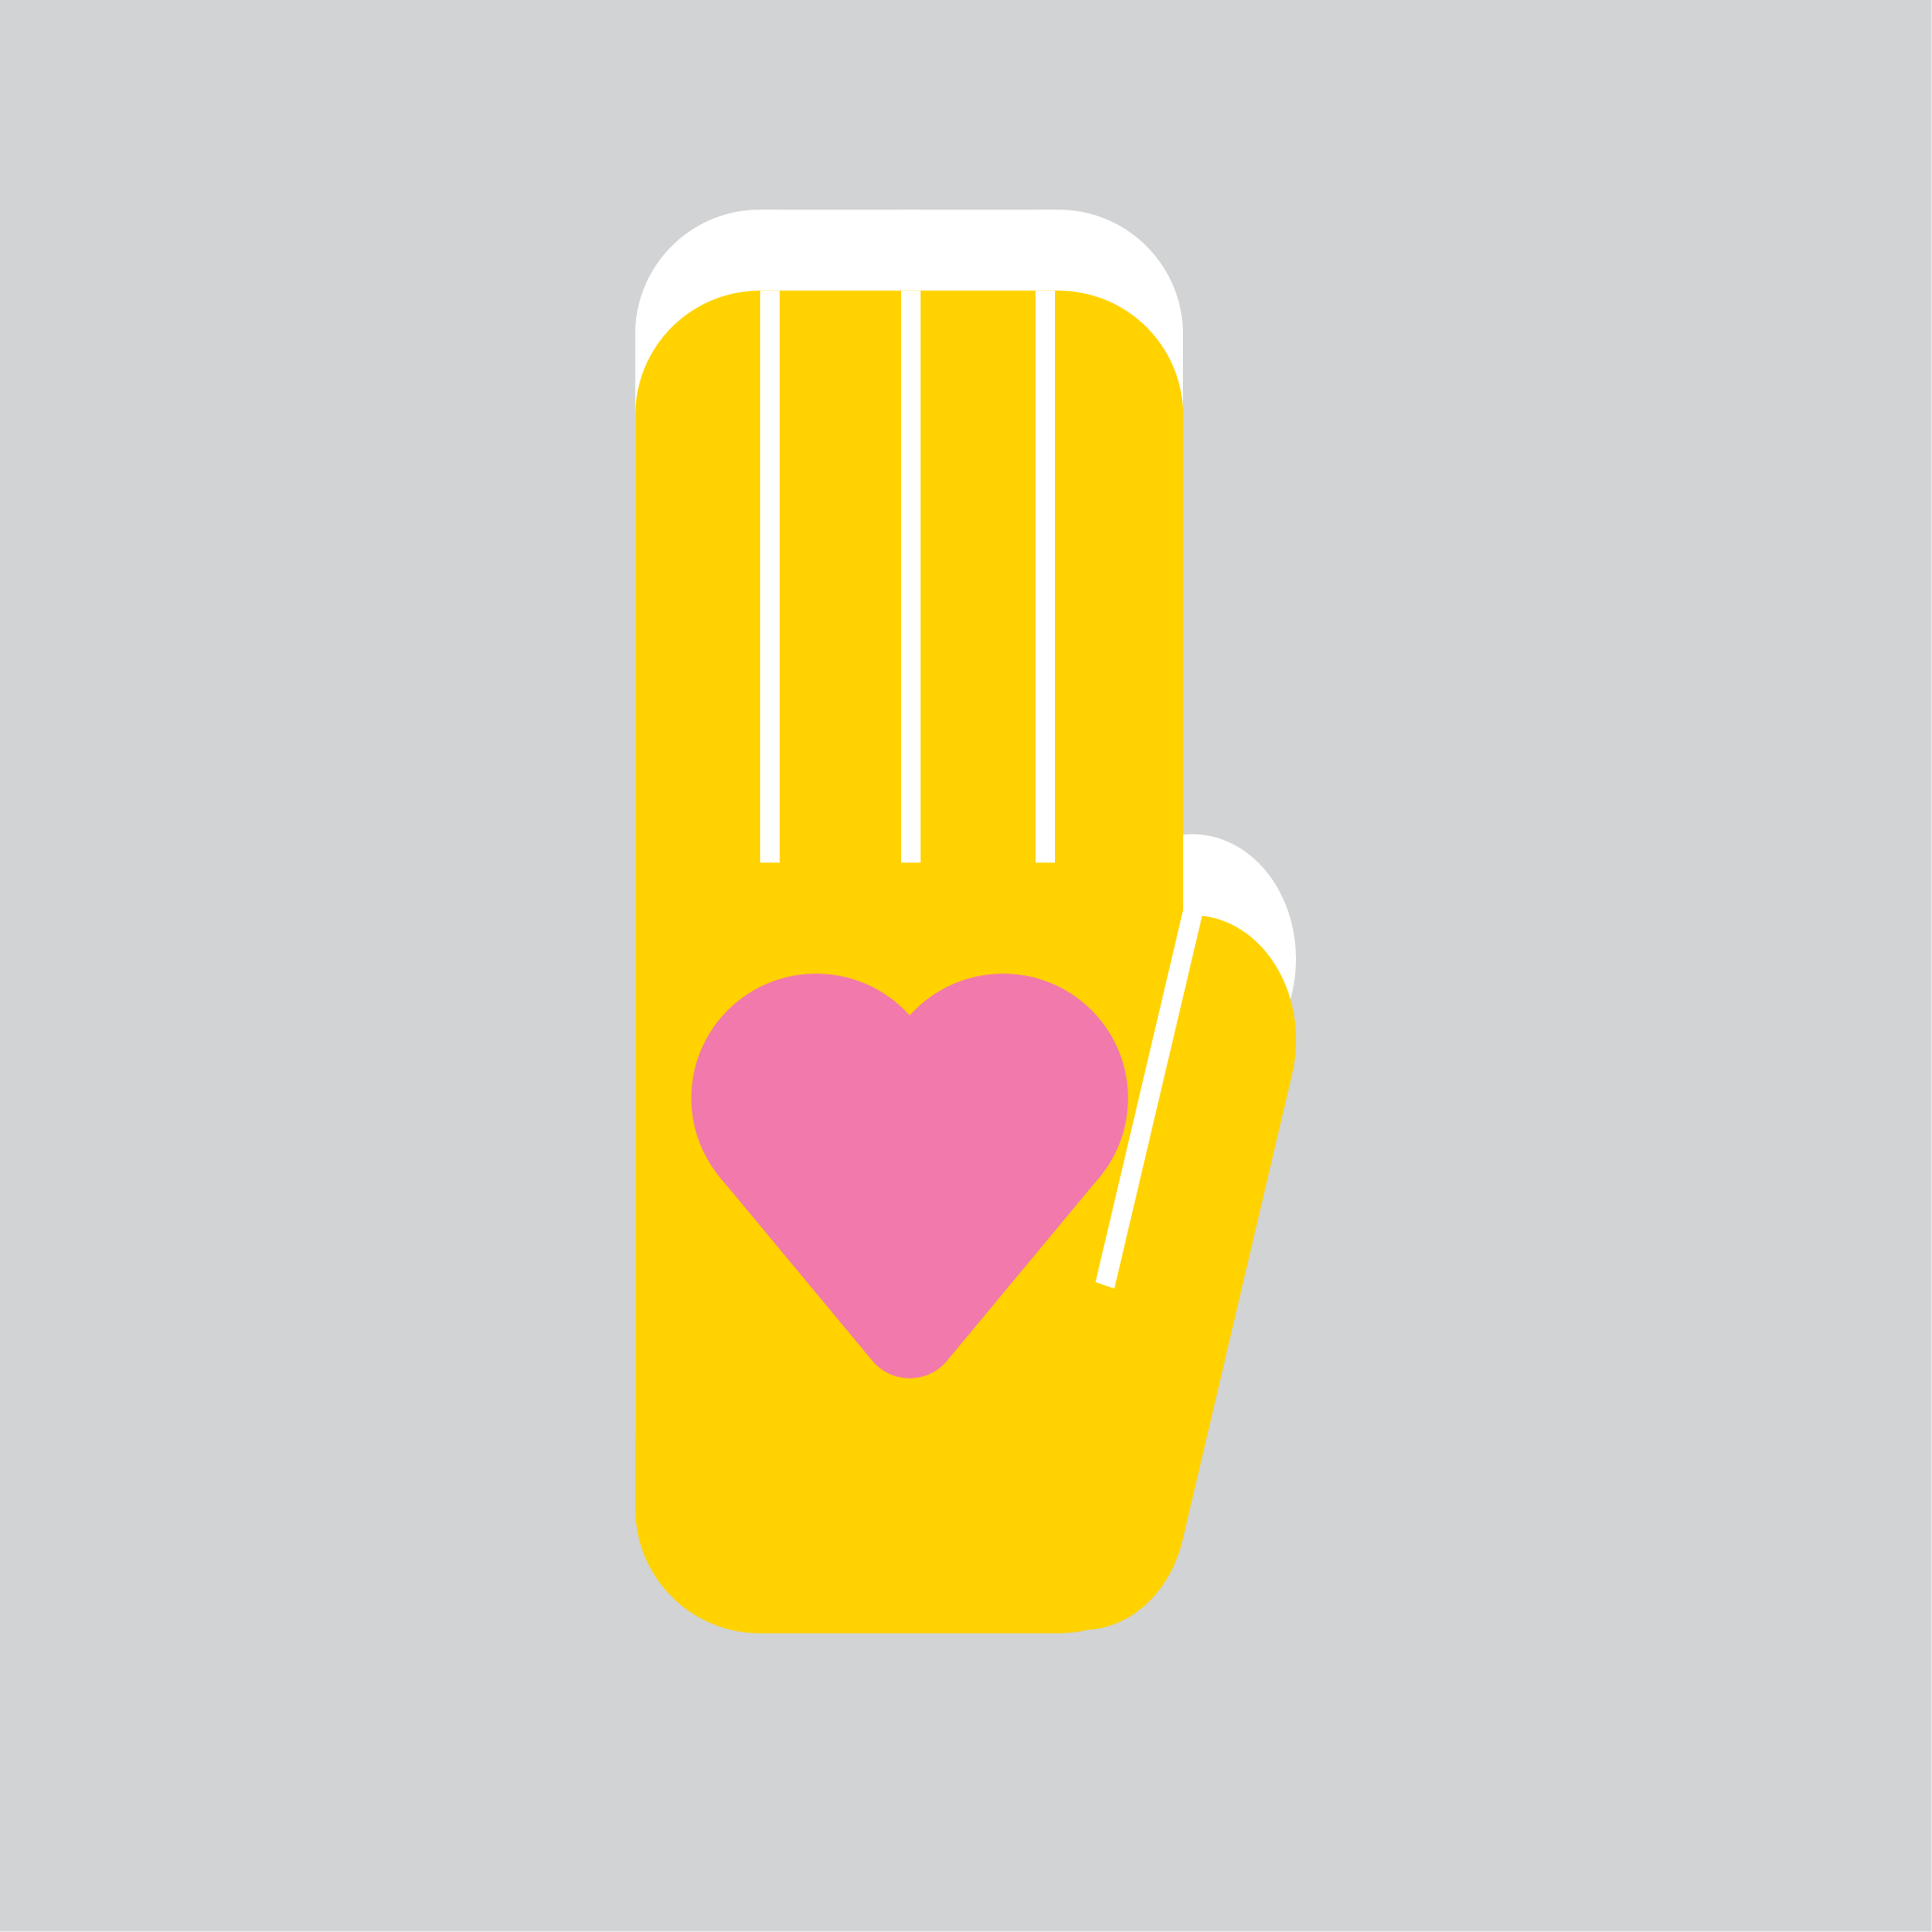 a vector image of a yellow hand with a pink heart in the center